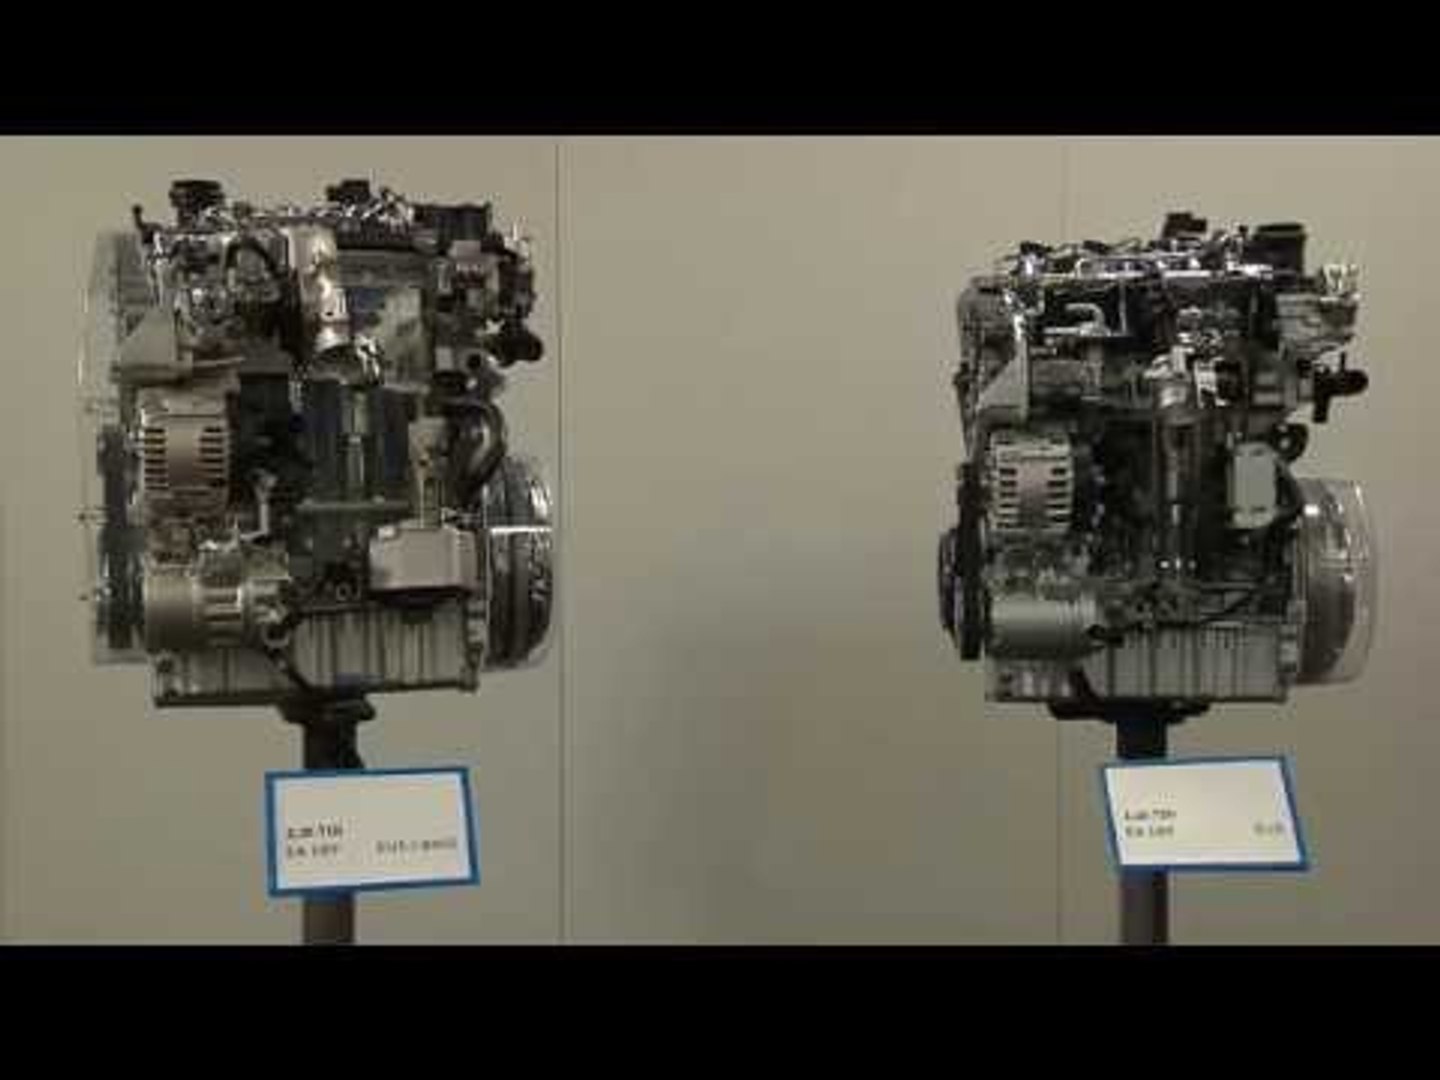 VW Technical for the EA 189 diesel engines affected AutoMotoTV - video Dailymotion